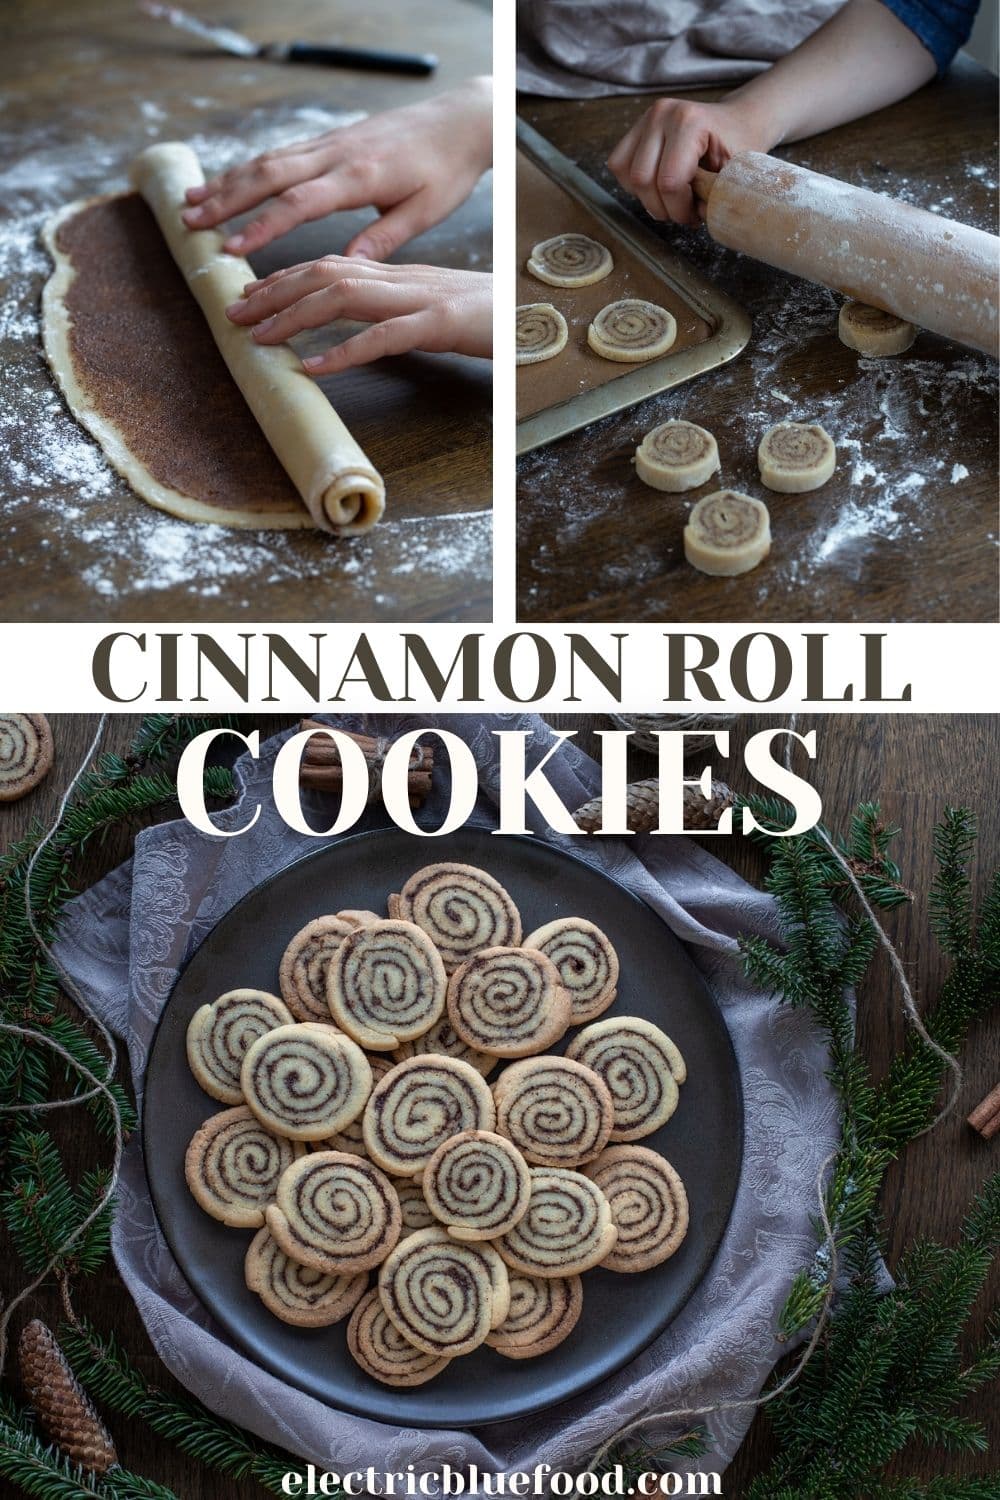 Cinnamon roll cookies filled with a delicious cinnamon and butter paste are the shortcrust cookie version of cinnamon buns.